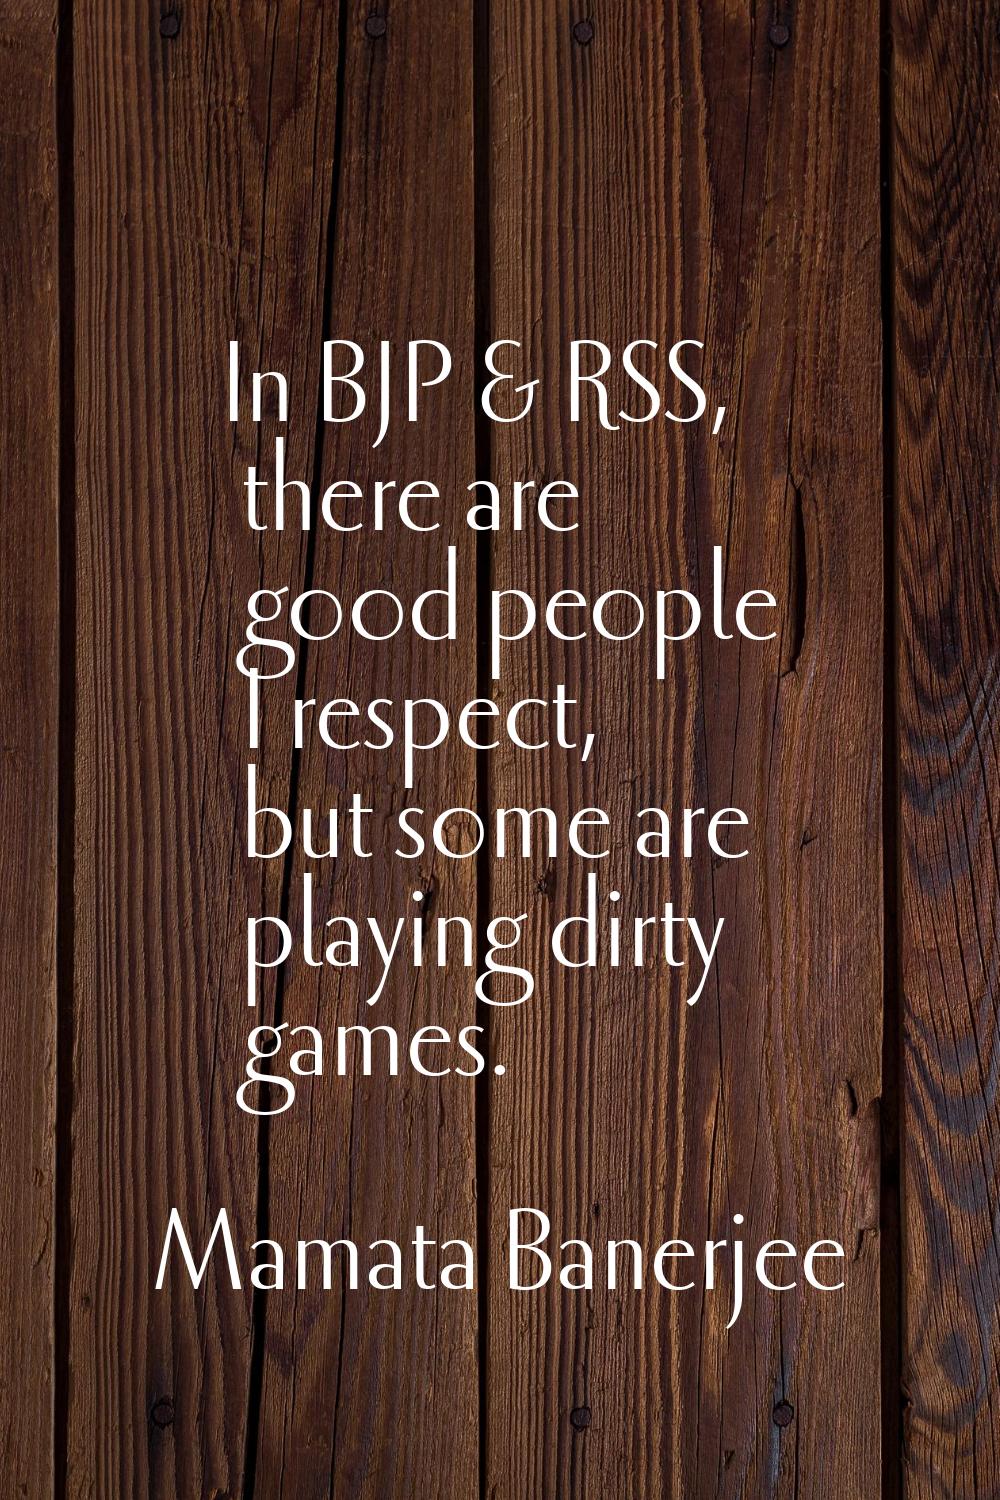 In BJP & RSS, there are good people I respect, but some are playing dirty games.